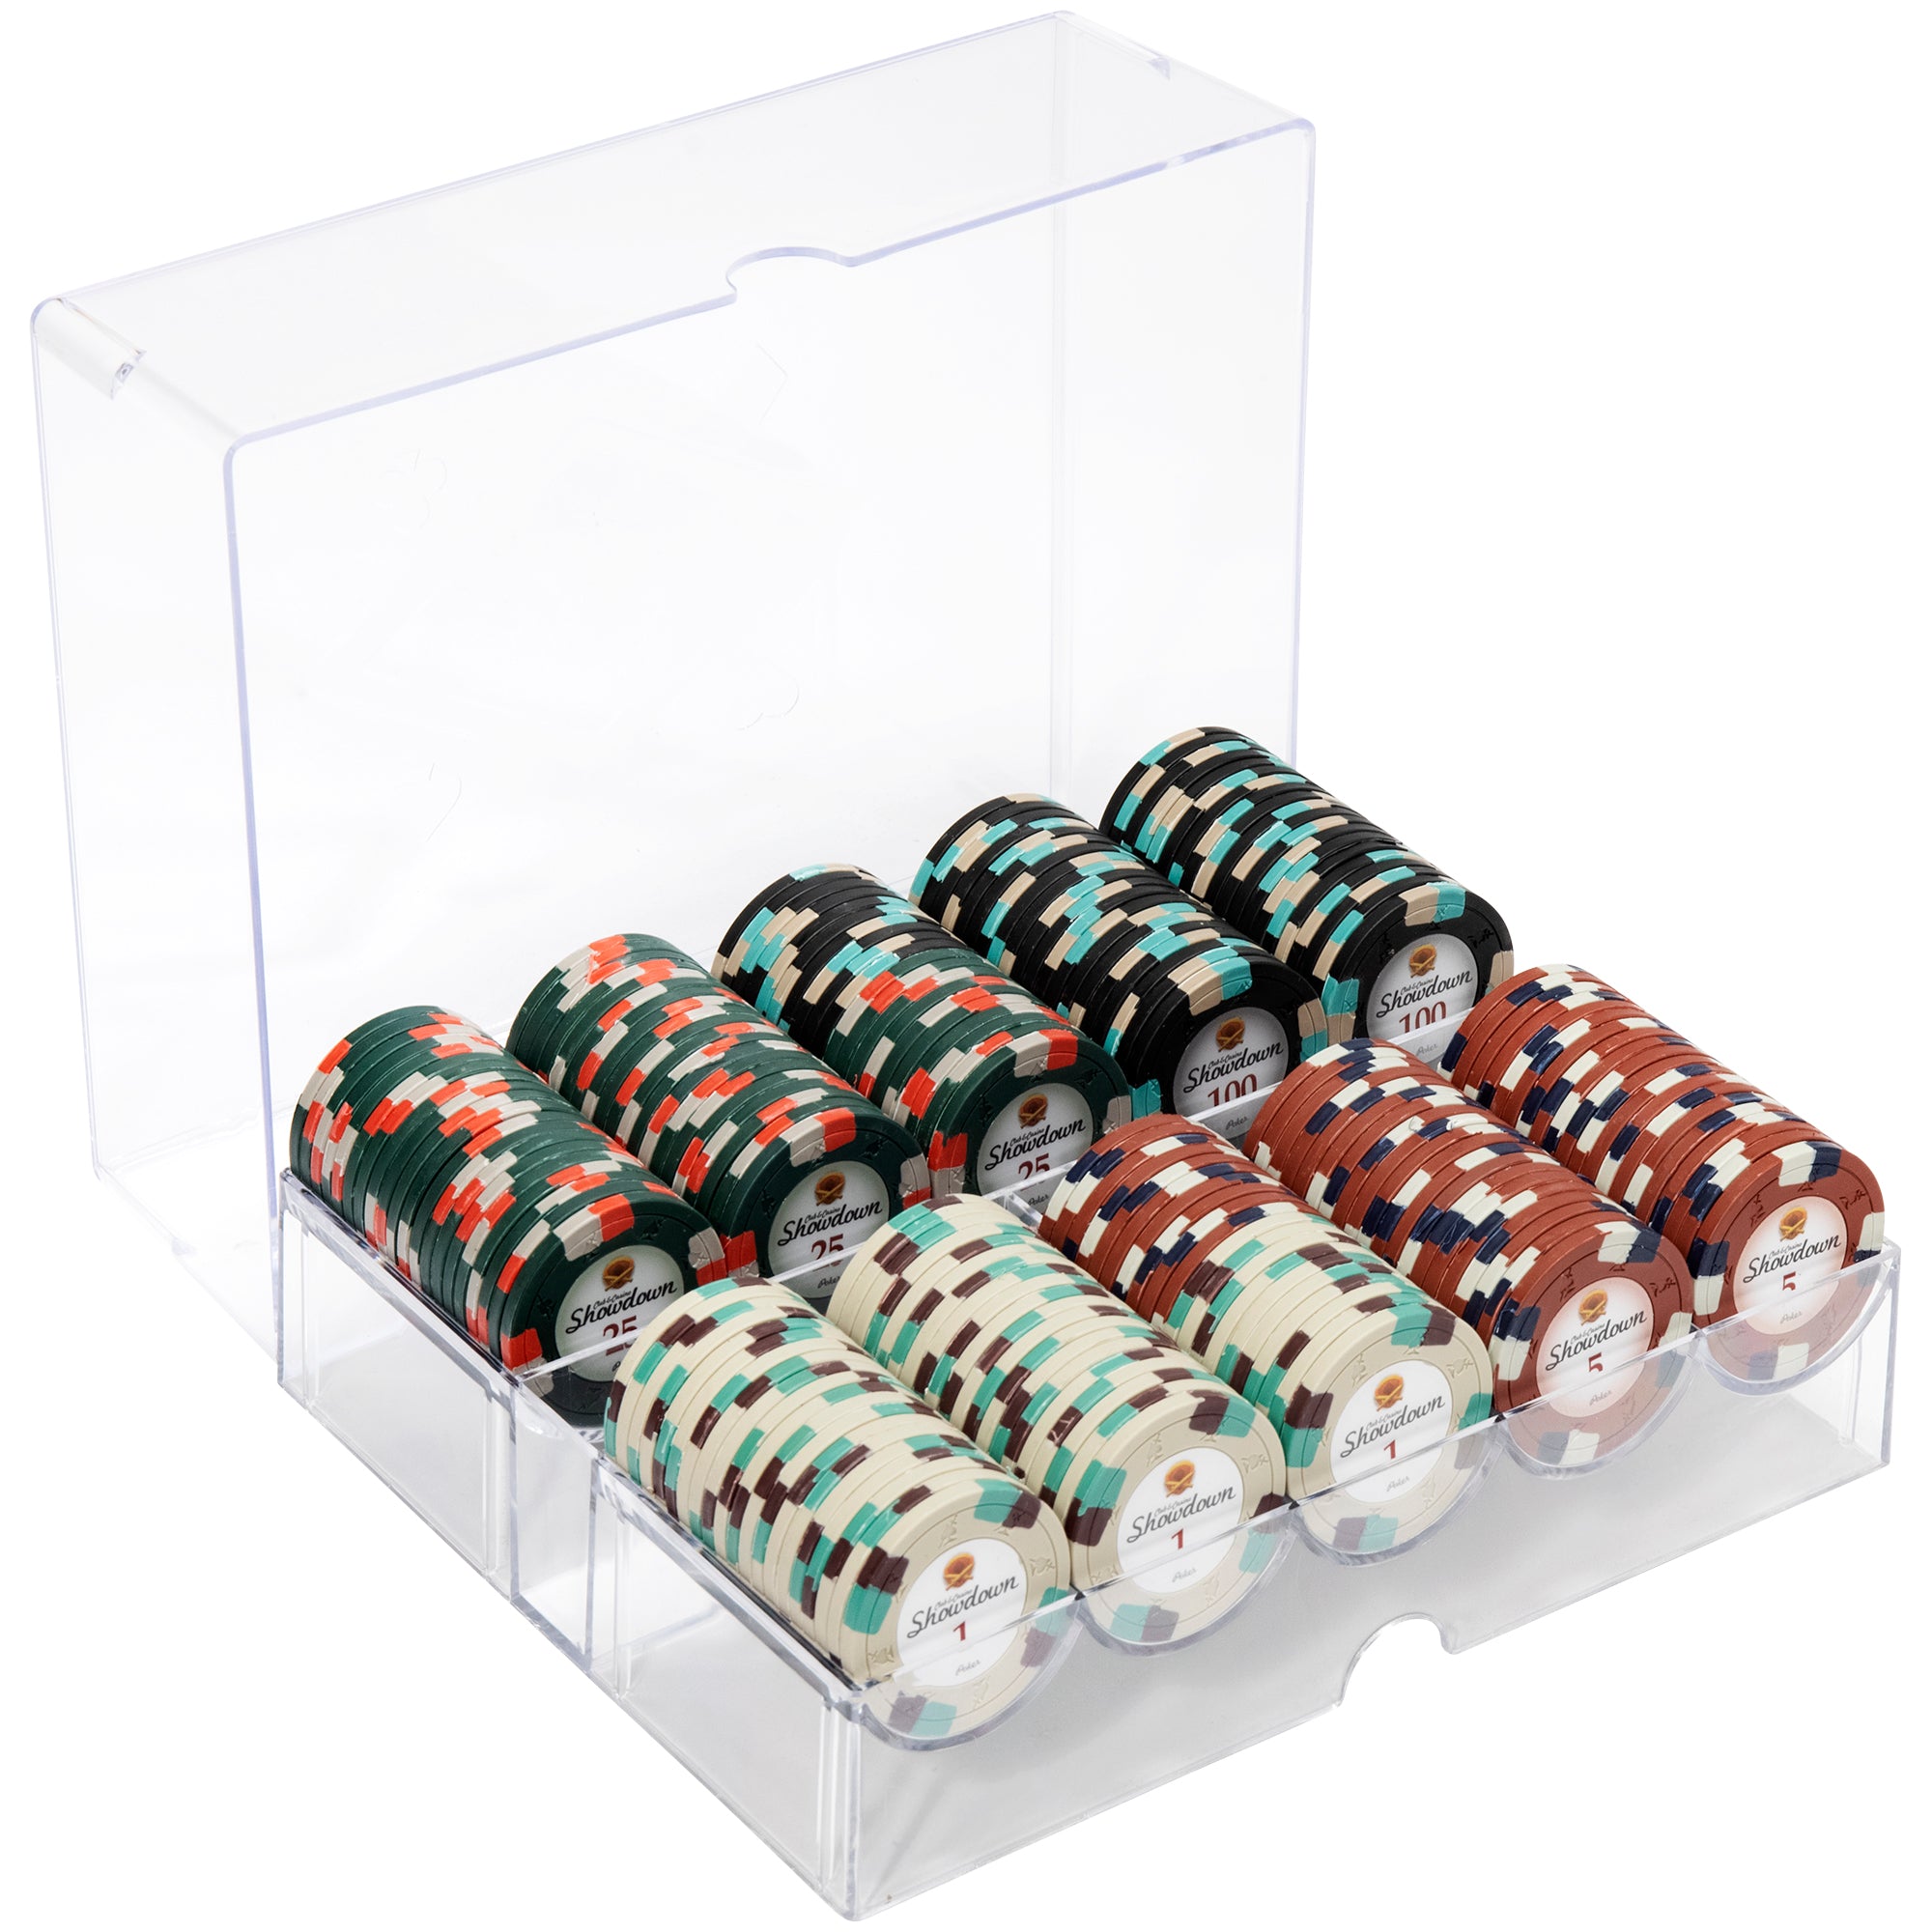 Showdown 13.5-gram Poker Chip Set in Acrylic Tray (200 Count) - Clay Composite